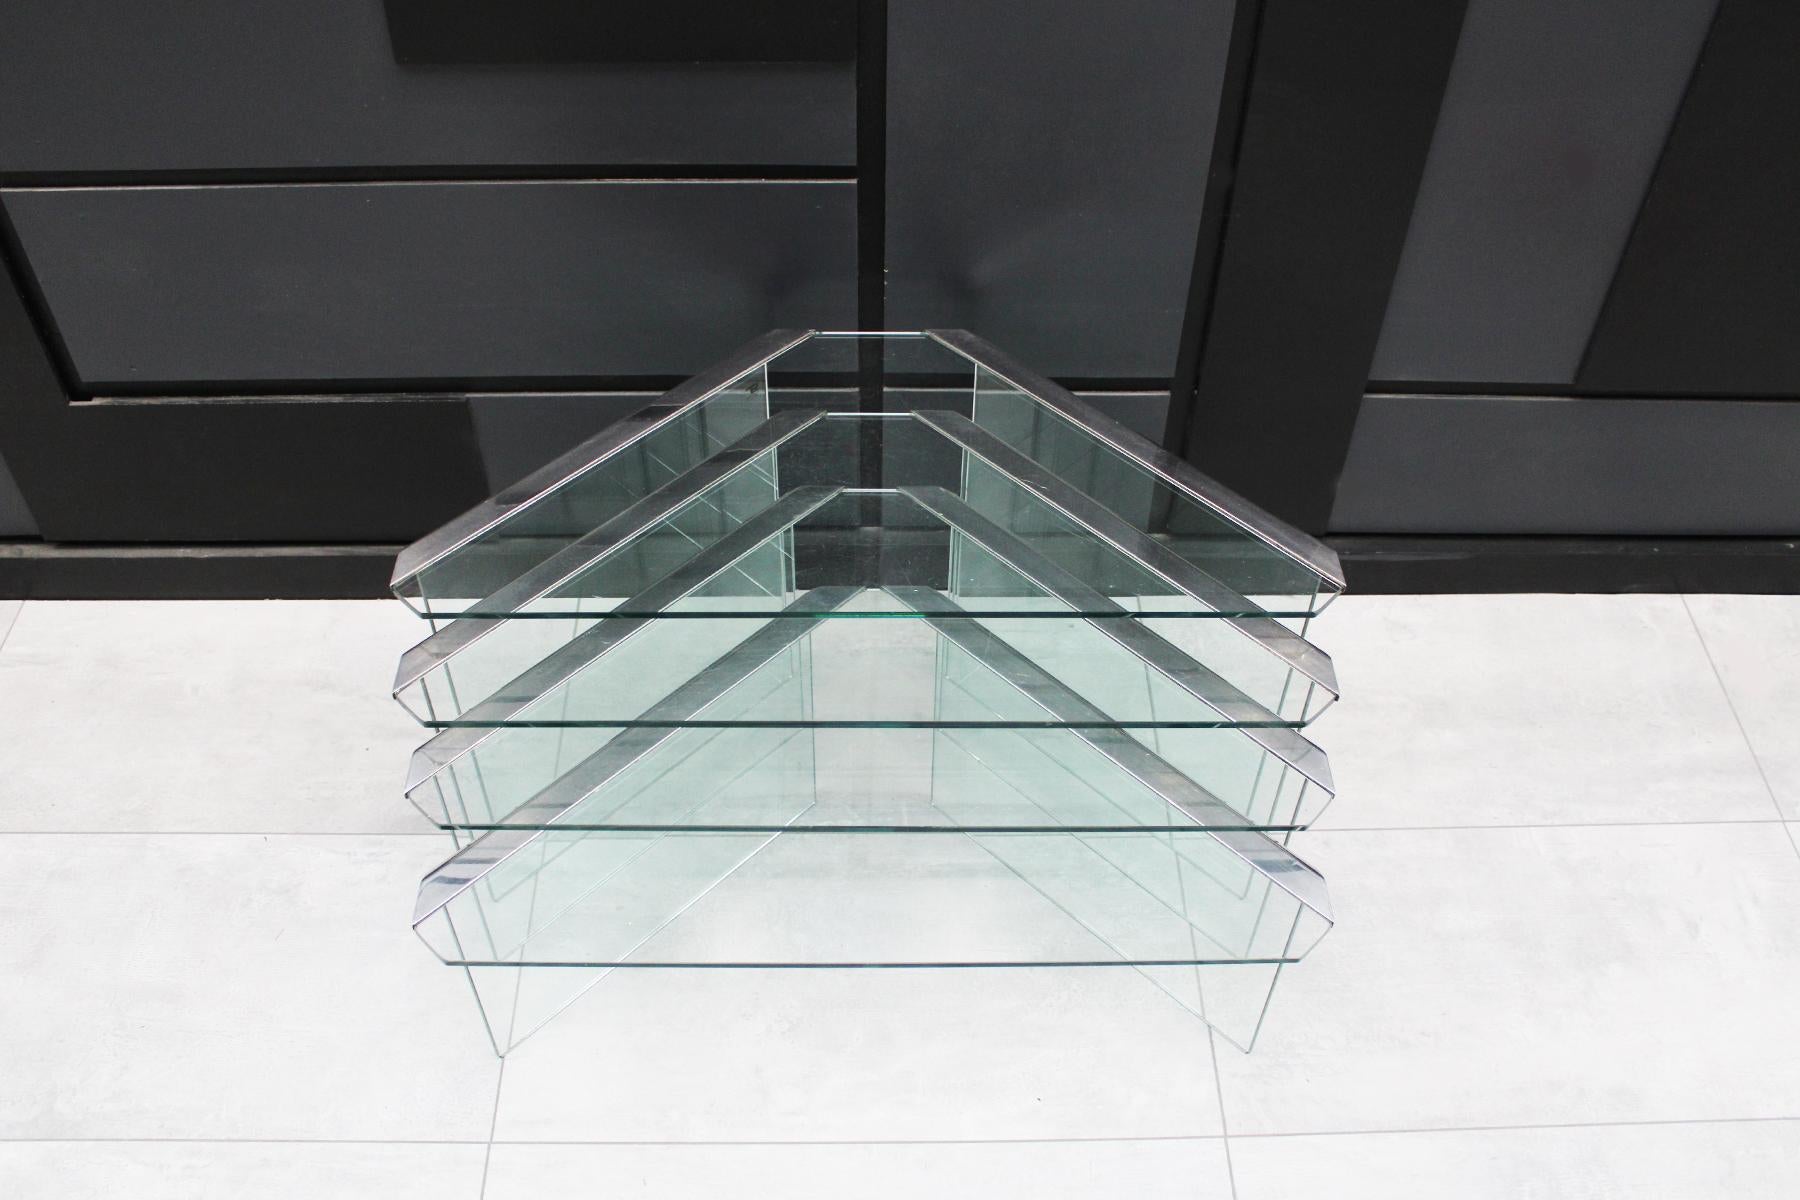 A classic set of 1970s nesting tables by Pierangelo Gallotti for Gallloti & Radice in clear 8mm tempered glass with chrome frames. This clever triangular design allows for all the tables to be stacked away in a small footprint but then can also be